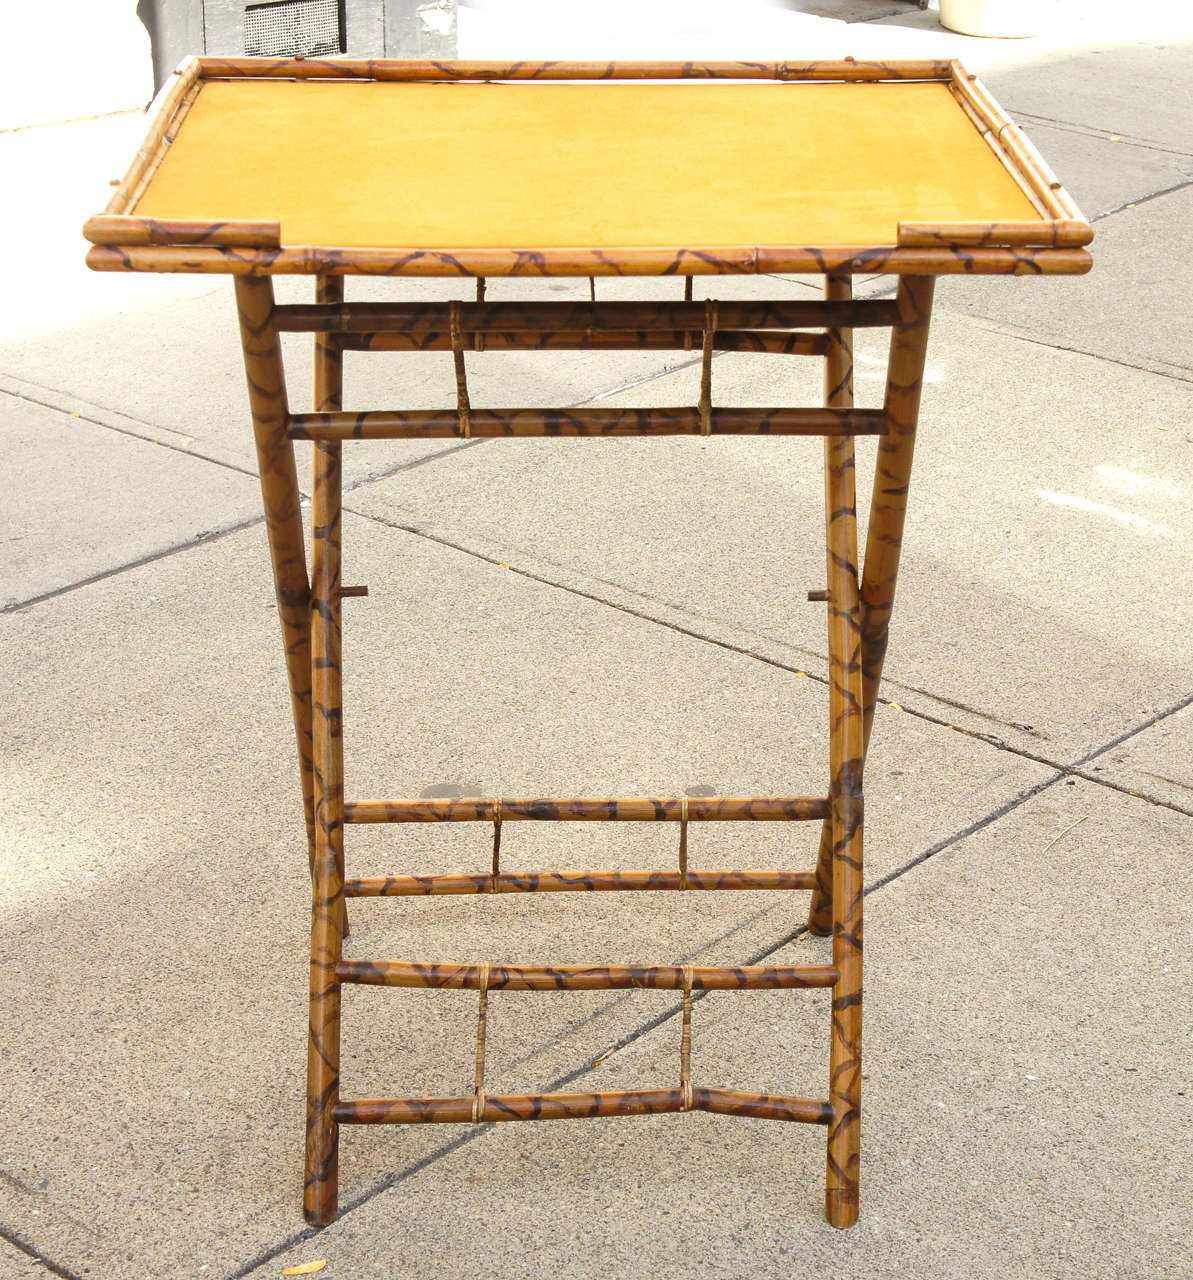 This late 19th or early 20th century folding table is constructed or burnt and stained bamboo.  English or American in manufacture the form is a standard Victorian form and used by all classes. Bamboo was considered in this time fashionable, exotic